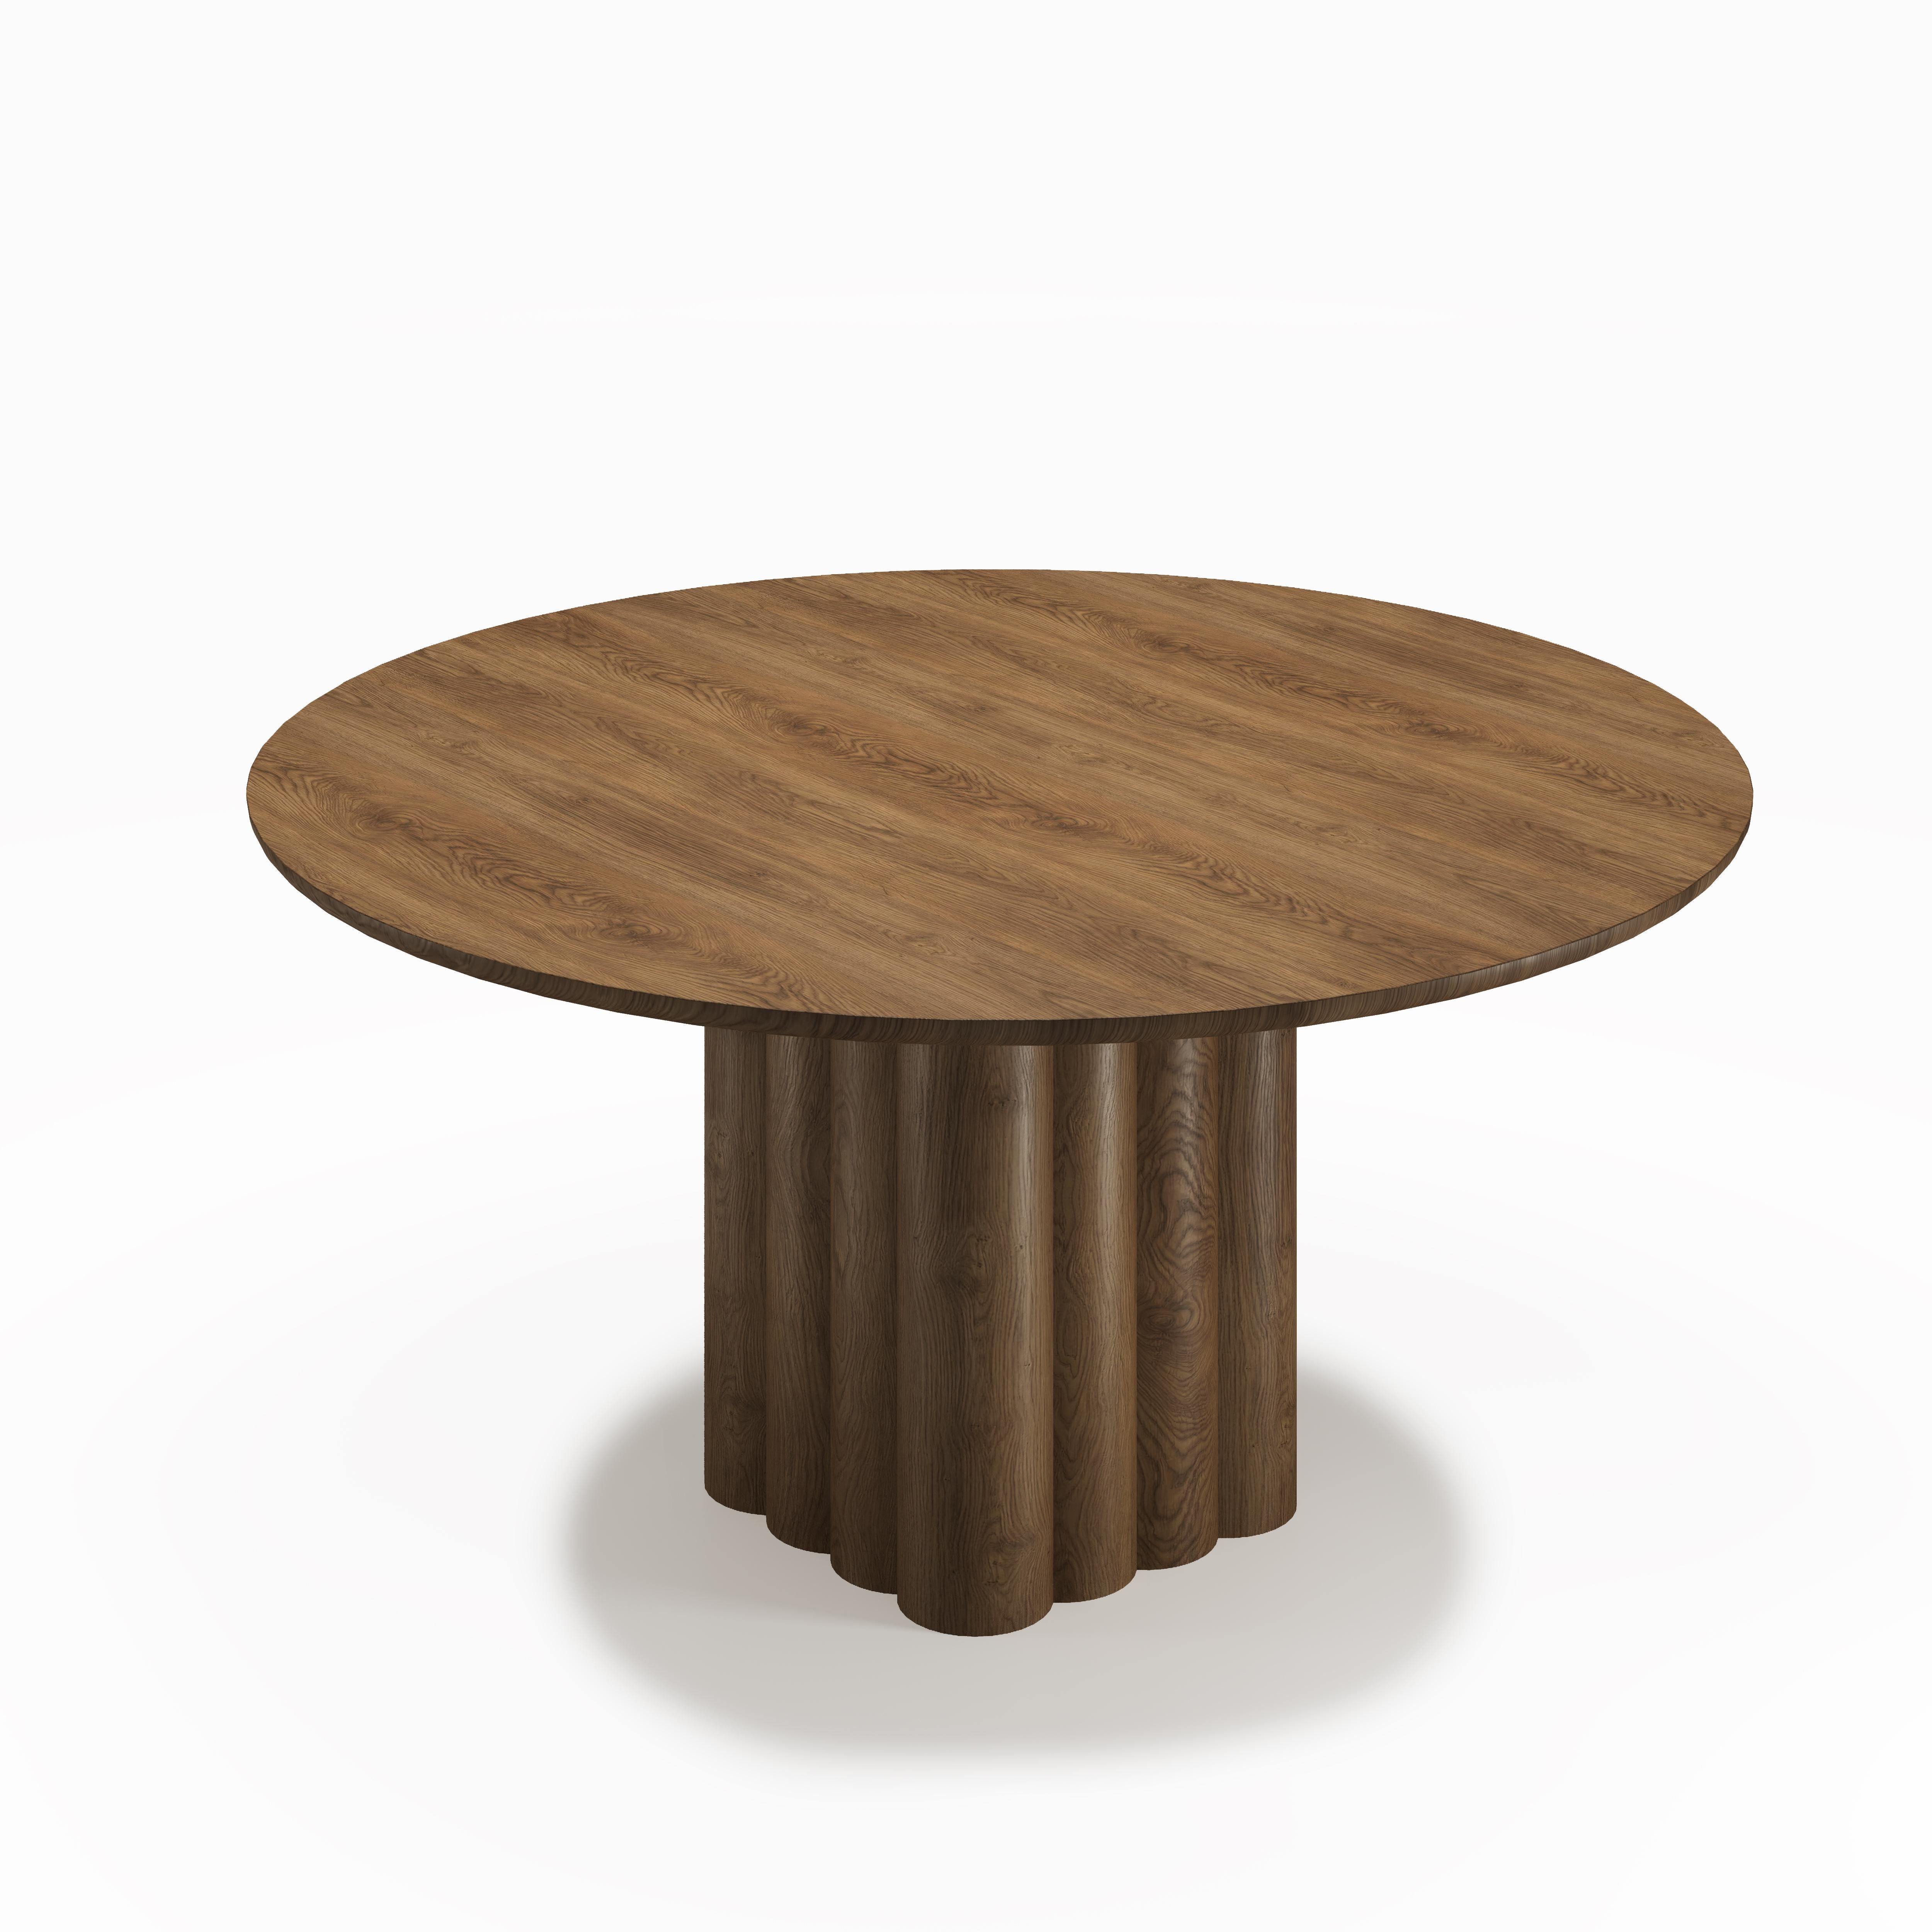 Round Dining Table 'Plush' by Dk3, Smoked Oak or Walnut, 160 cm For Sale 7